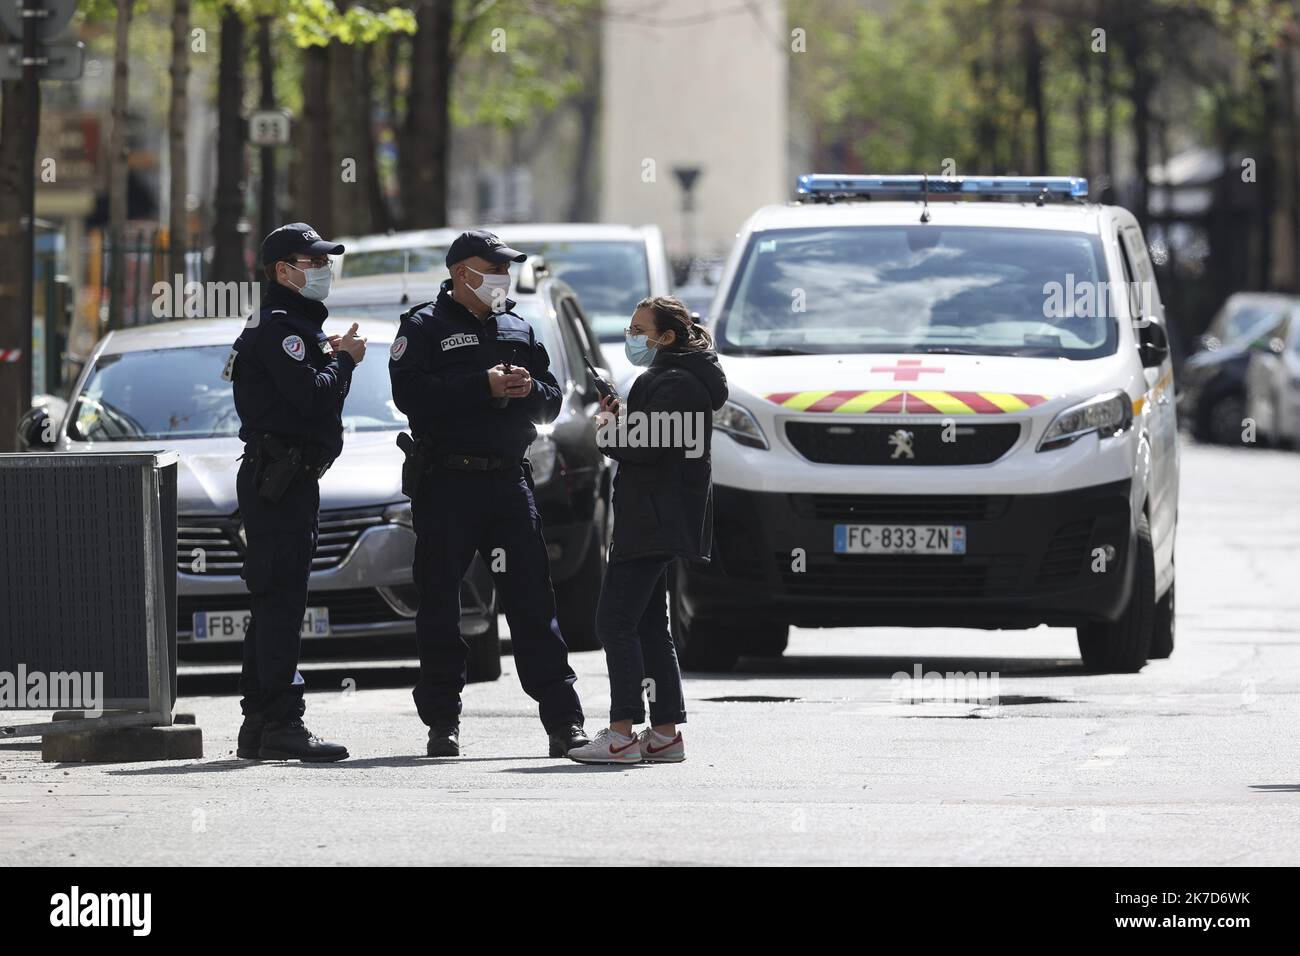 ©Sebastien Muylaert/MAXPPP - French police officers secure a street near the Henri Dunant hospital where two people have been shot n Paris. One person was dead, another was injured and being treated. The gunman fled on a motorcycle. The motive for the attack is still unknown. 12.04.2021 Stock Photo